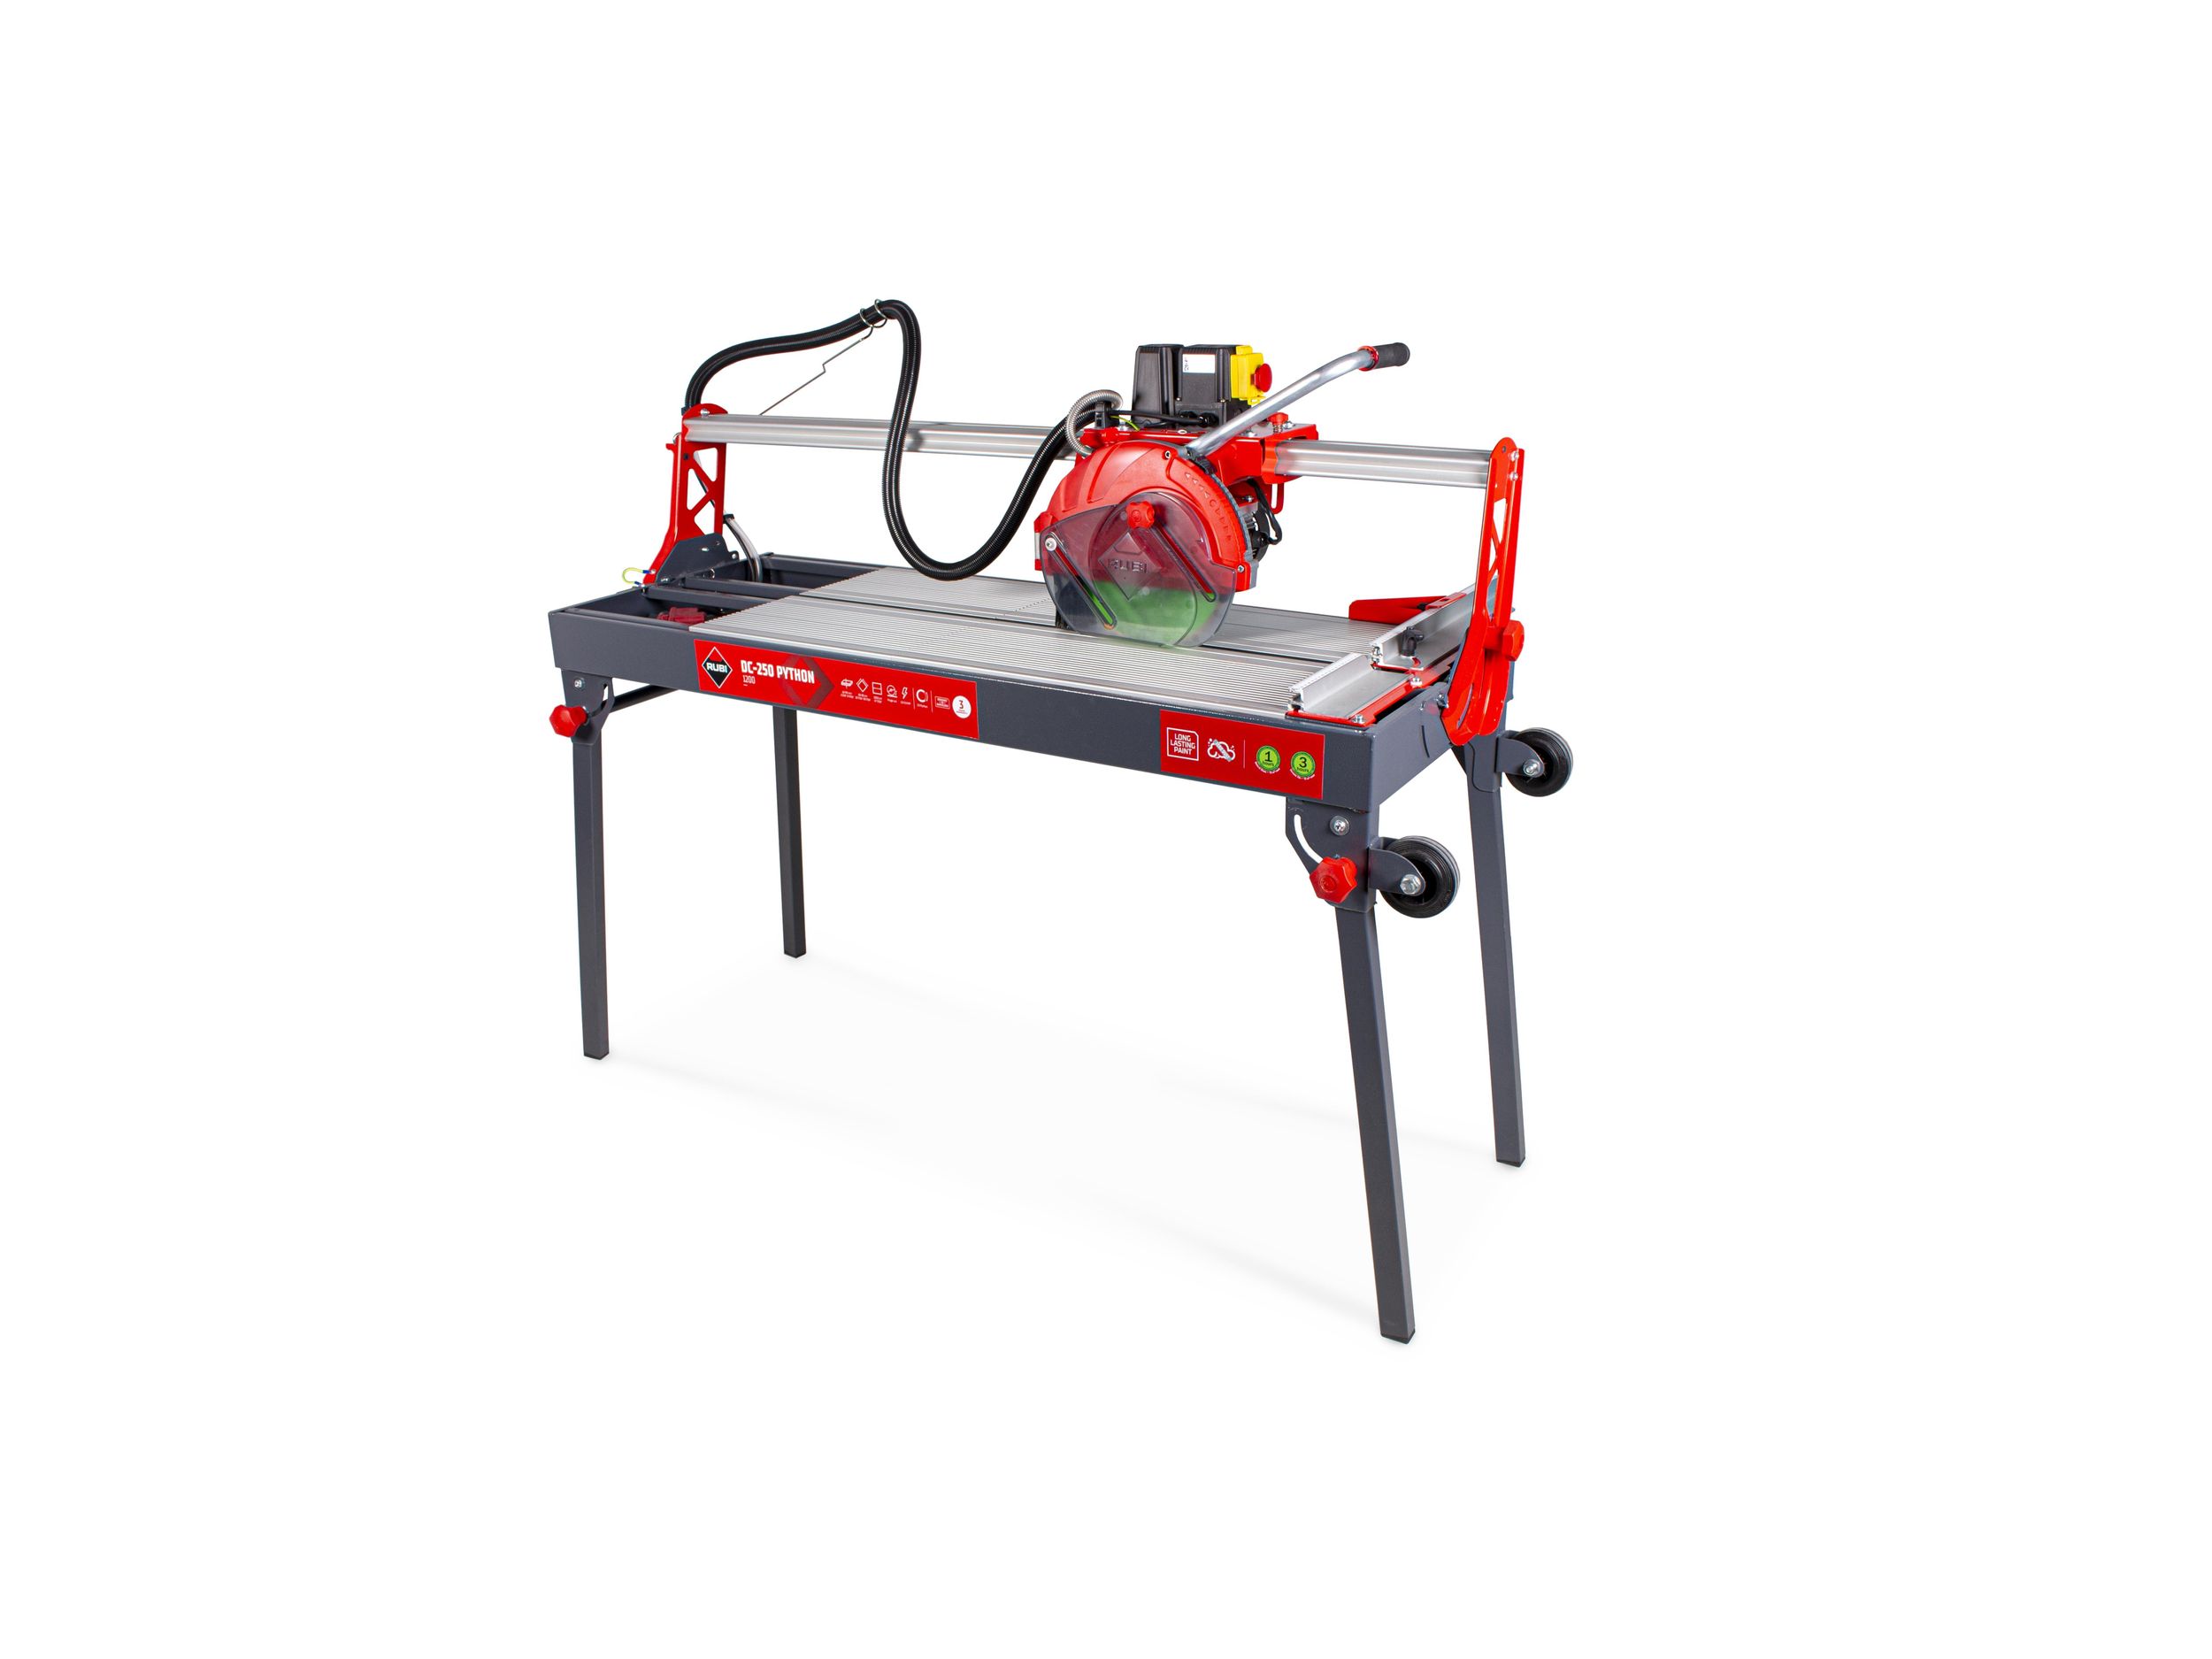 Rubi Tools ND 7IN READY Portable Electric Tile Saw - 1